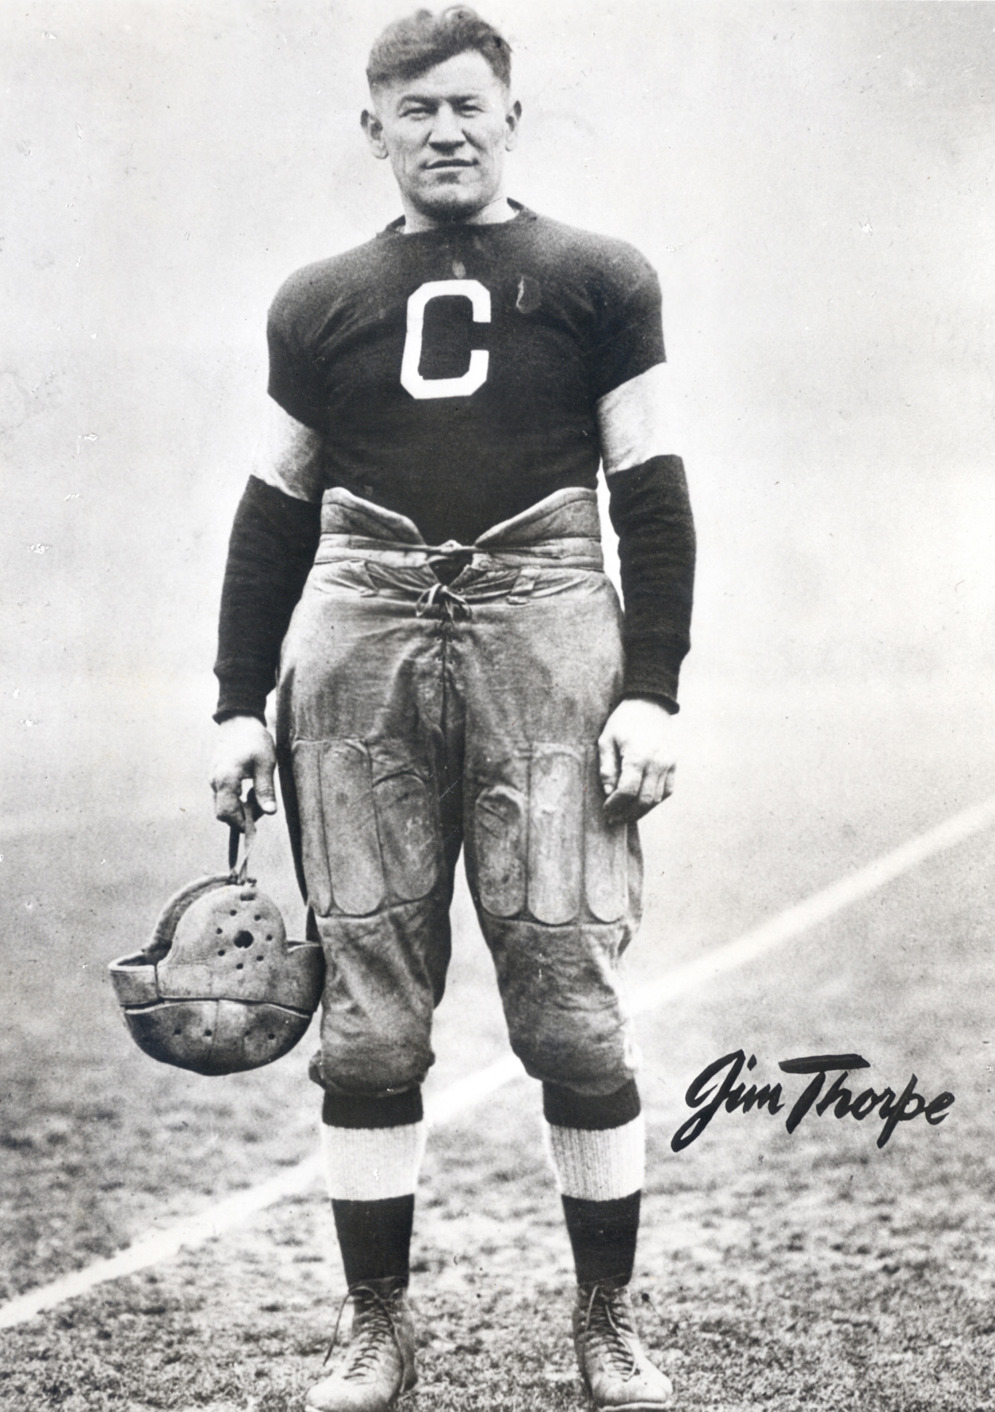 Jim Thorpe, 6 feet 1 inch tall and about 200 pounds, combined speed with bruising power as a halfback. (Pro Football Hall of Fame)